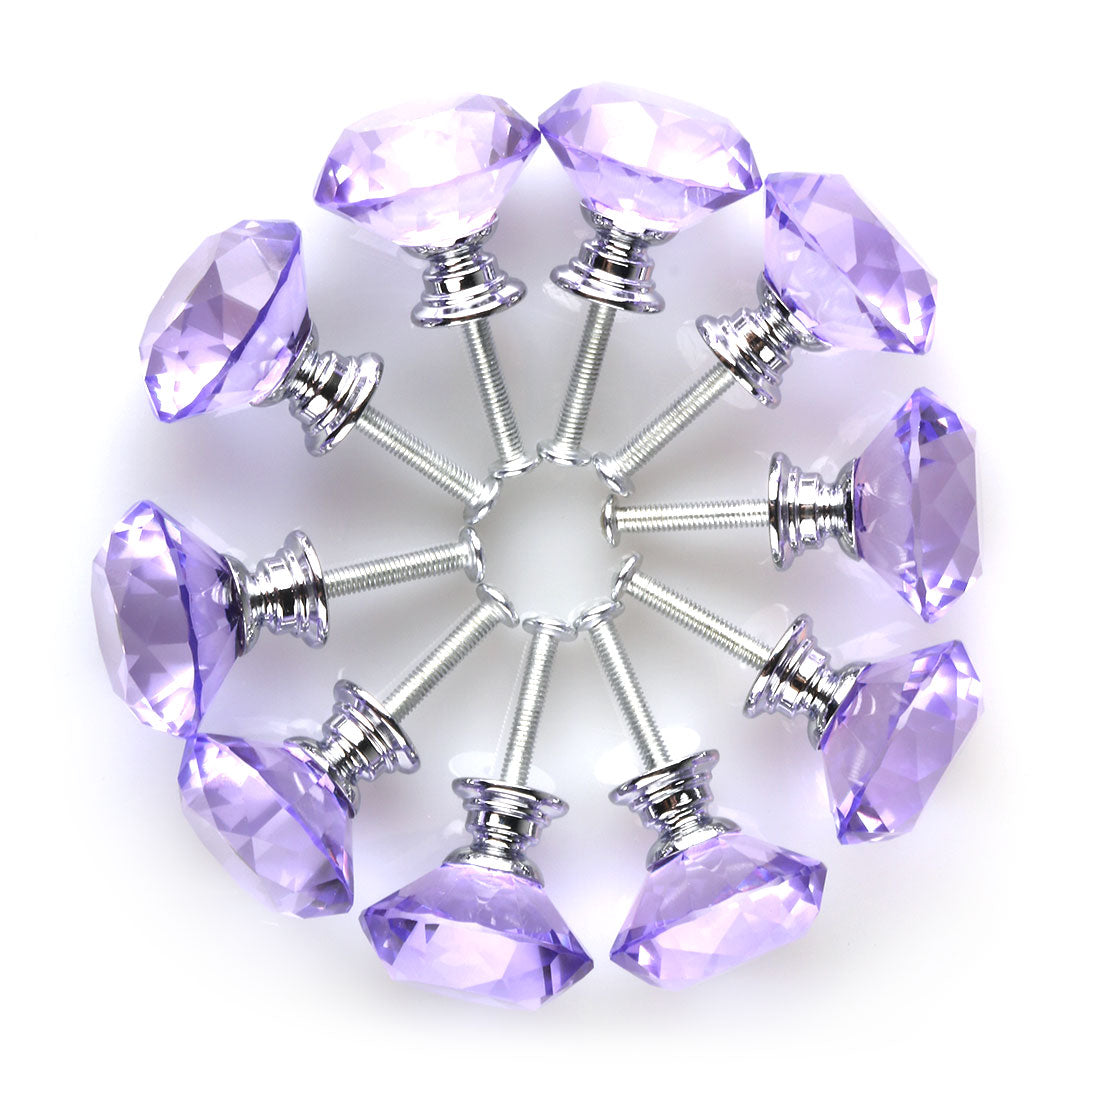 uxcell Uxcell 30mm Clear Crystal Glass Diamond Shape Drawer Knobs Cabinet Pull Handle New Purple 10pcs